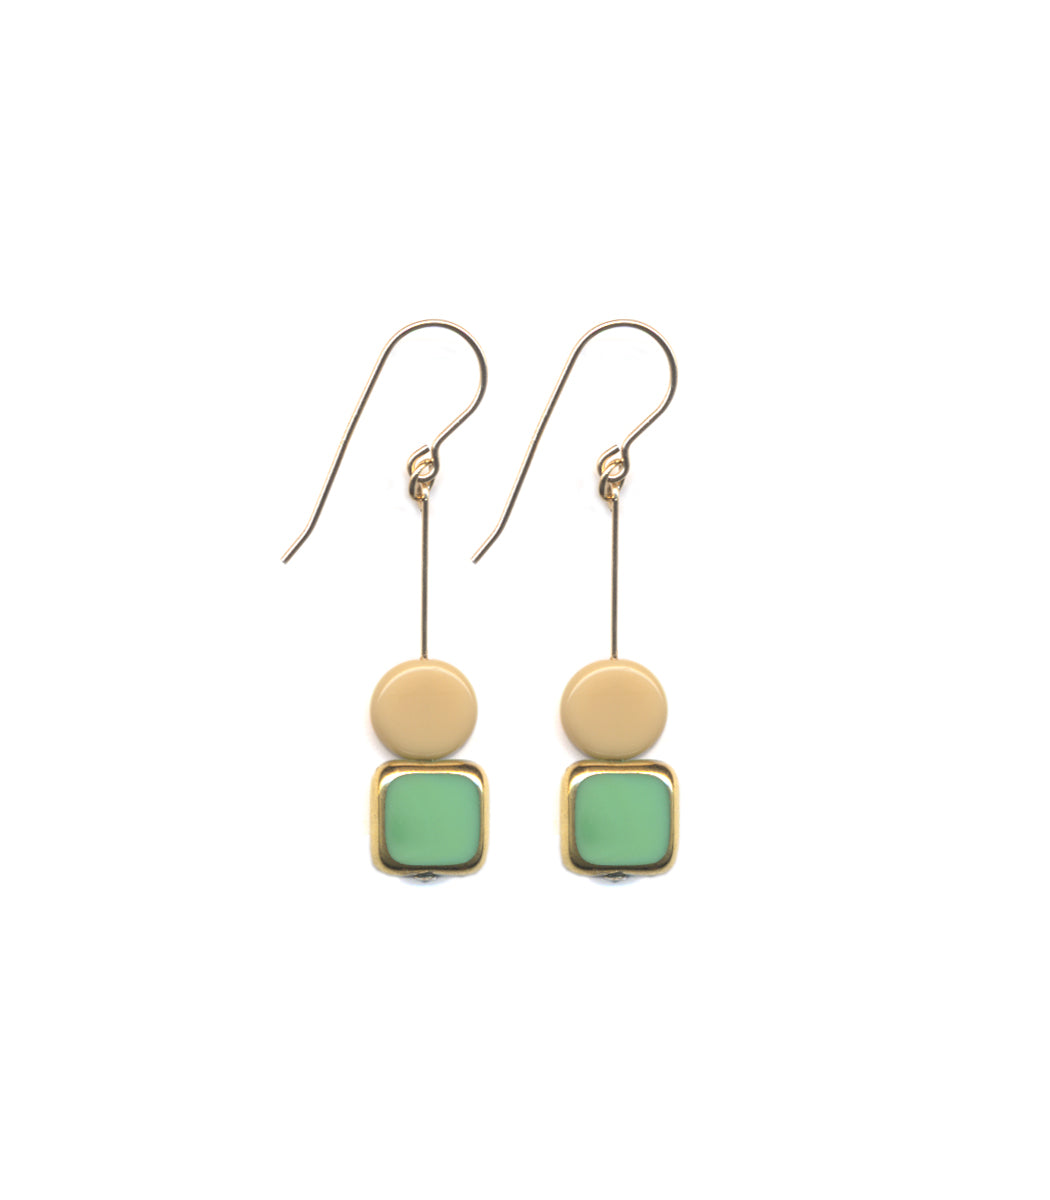 E1768 Greens Square with Cream Earrings